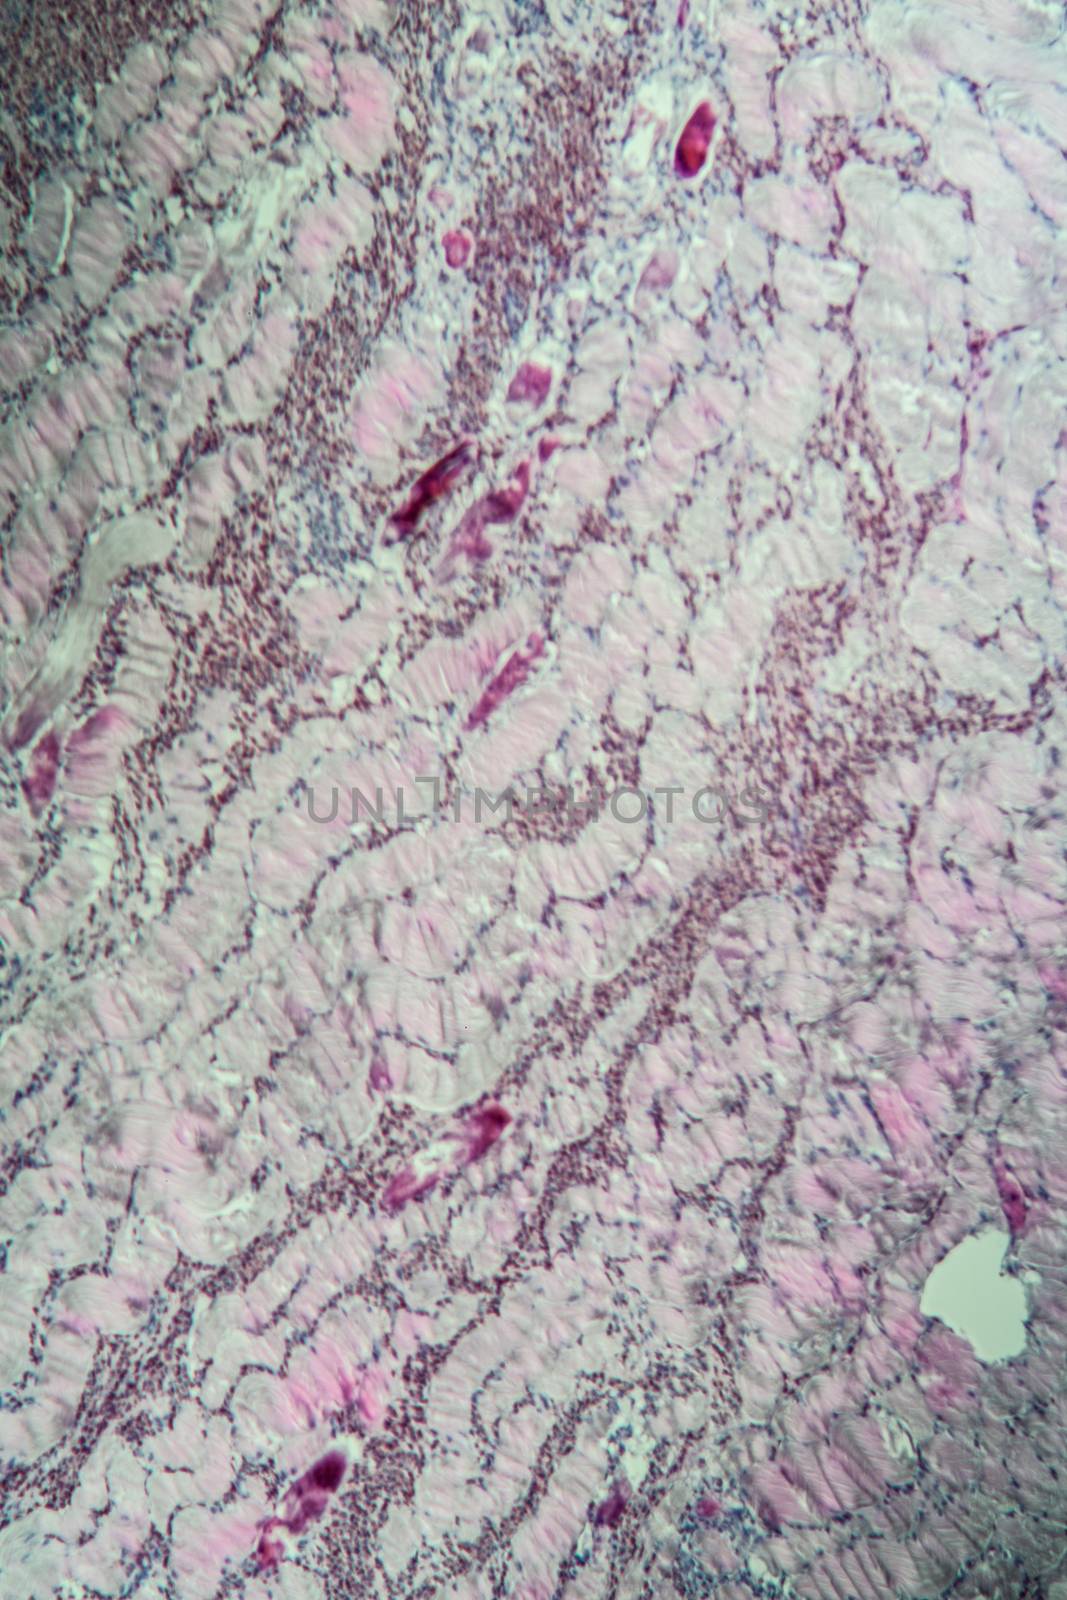 Sarcocystis spore animals in muscle, 100x